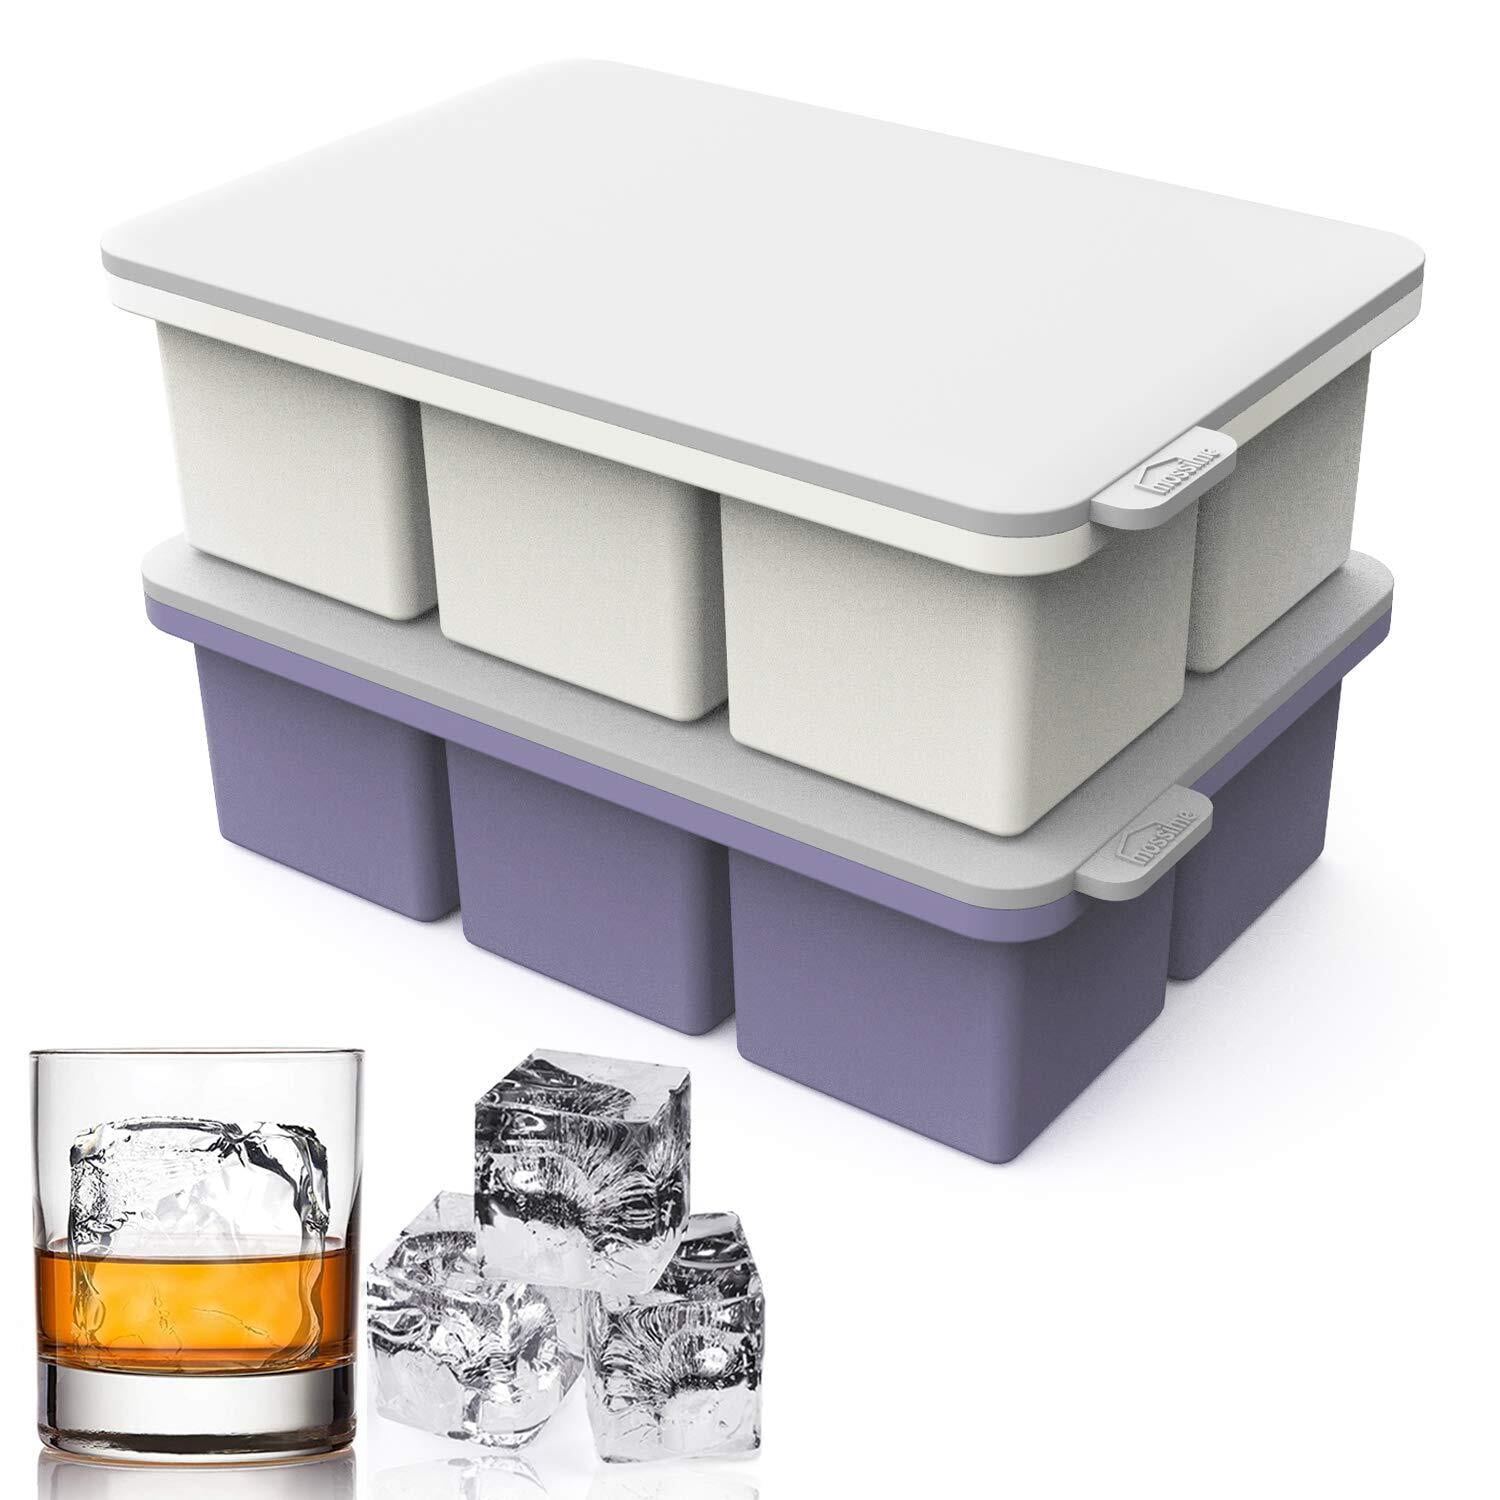 Large Square Silicone Ice Cube Trays for freezer with Lids, 2 Pack, 2 inch  Ice Cube Molds, Whiskey,Cocktail,Baby Food Storage,Sauce Soups Freezing